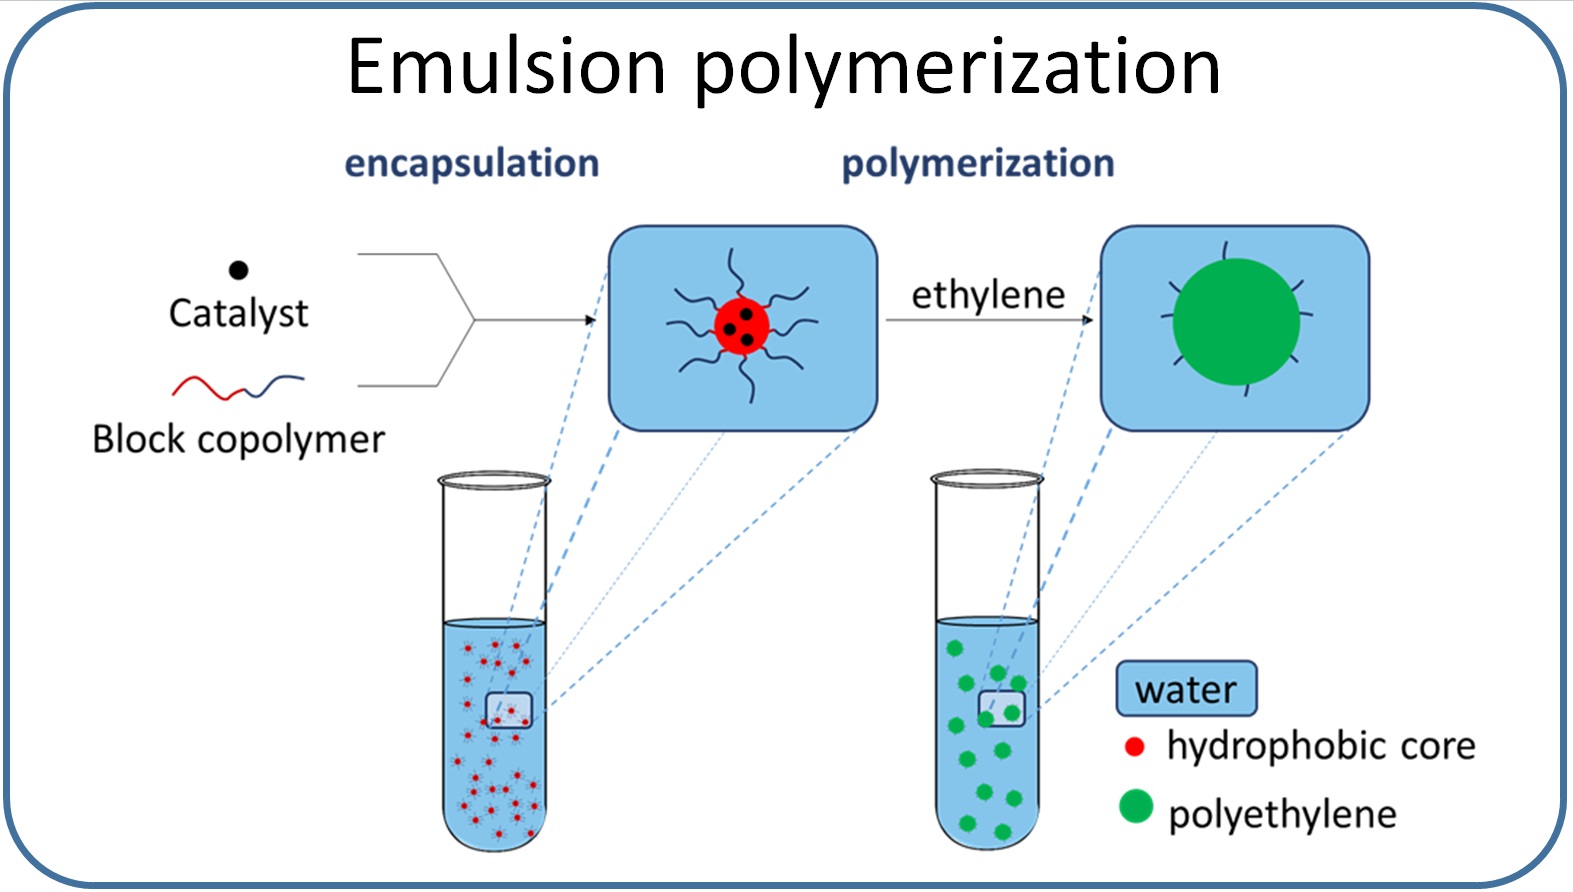 We work on advanced encapsulation techniques in order to perform water sensitive catalytic polymerizations in an aqueous dispersion. These encapsulation techniques employ microfluidics, micelle formation, and microemulsions to form a protective shell around the catalyst. These techniques require a detailed understanding in mass transfer and polymerization kinetics.